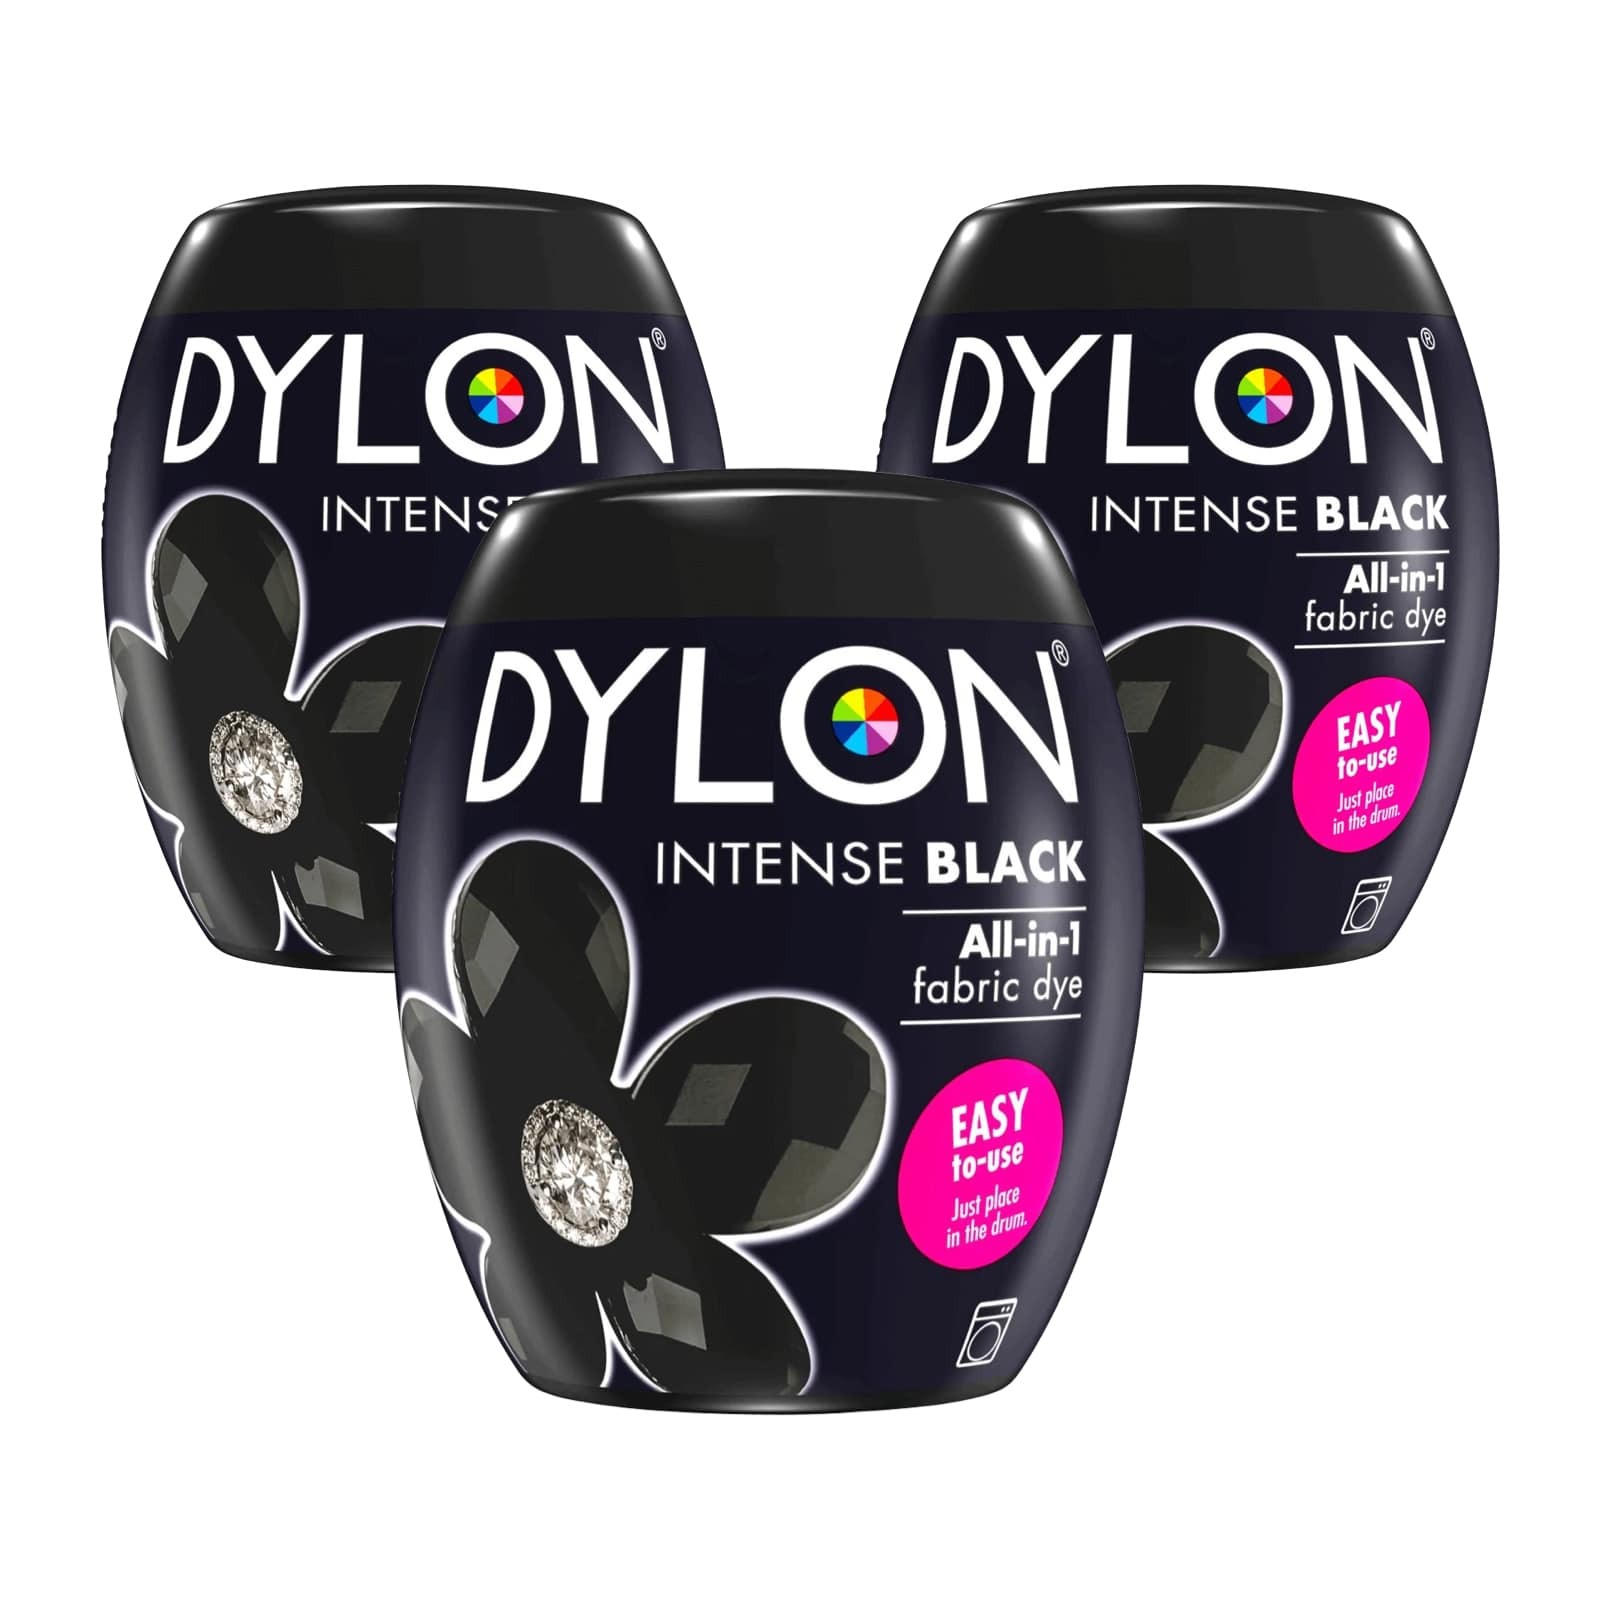 Dylon Machine Dye Pod 350g 12 Intense Black - Wilsons - Import,  distribution and wholesale of branded household, hardware and DIY products